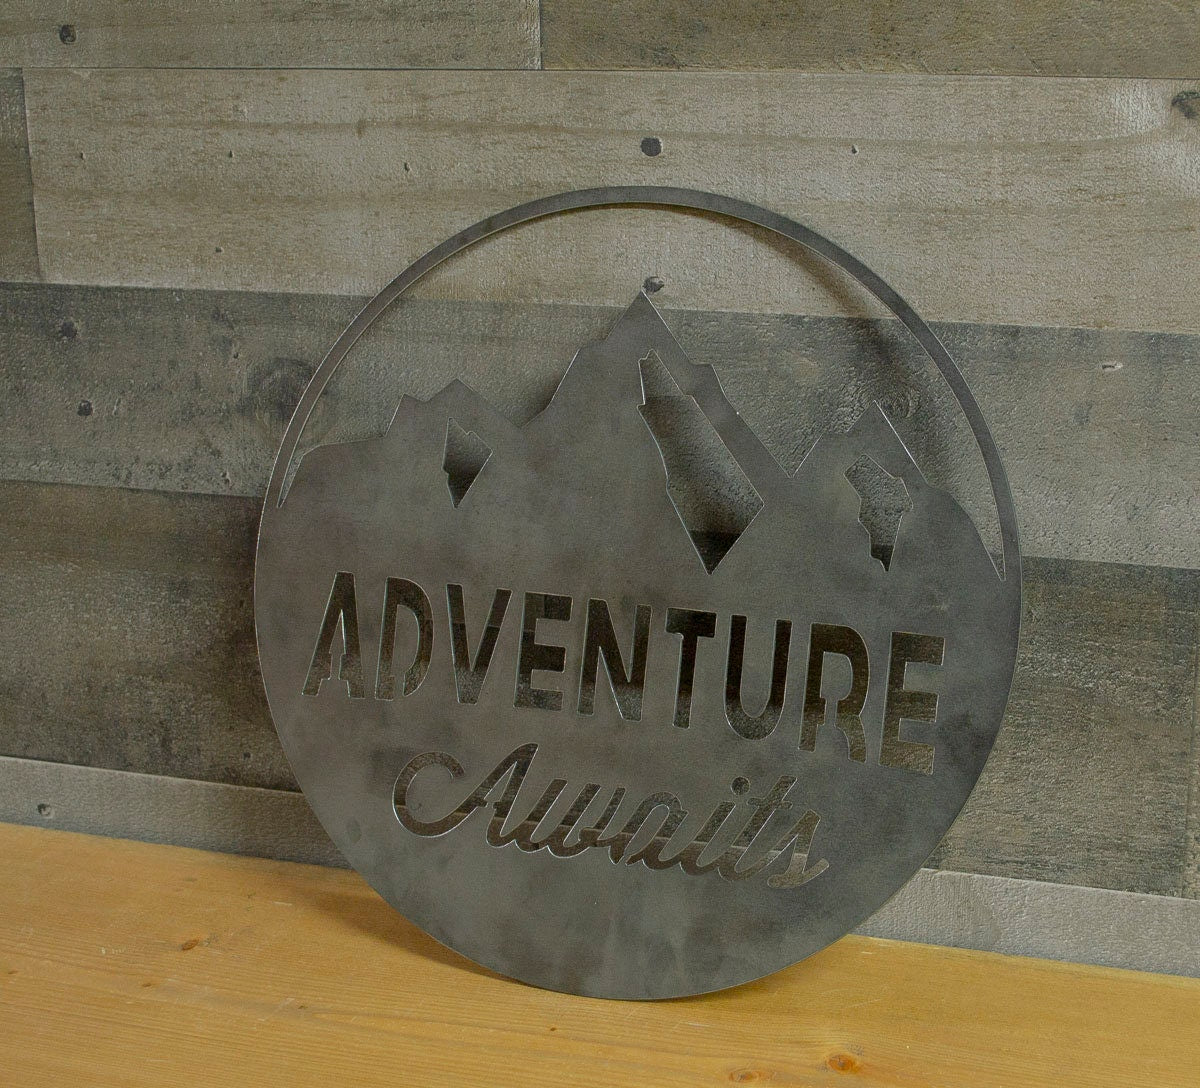 Custom, Personalized, Adventure Awaits Round Metal Sign, Industrial, Farmhouse Decor, Cabin Wall Art,